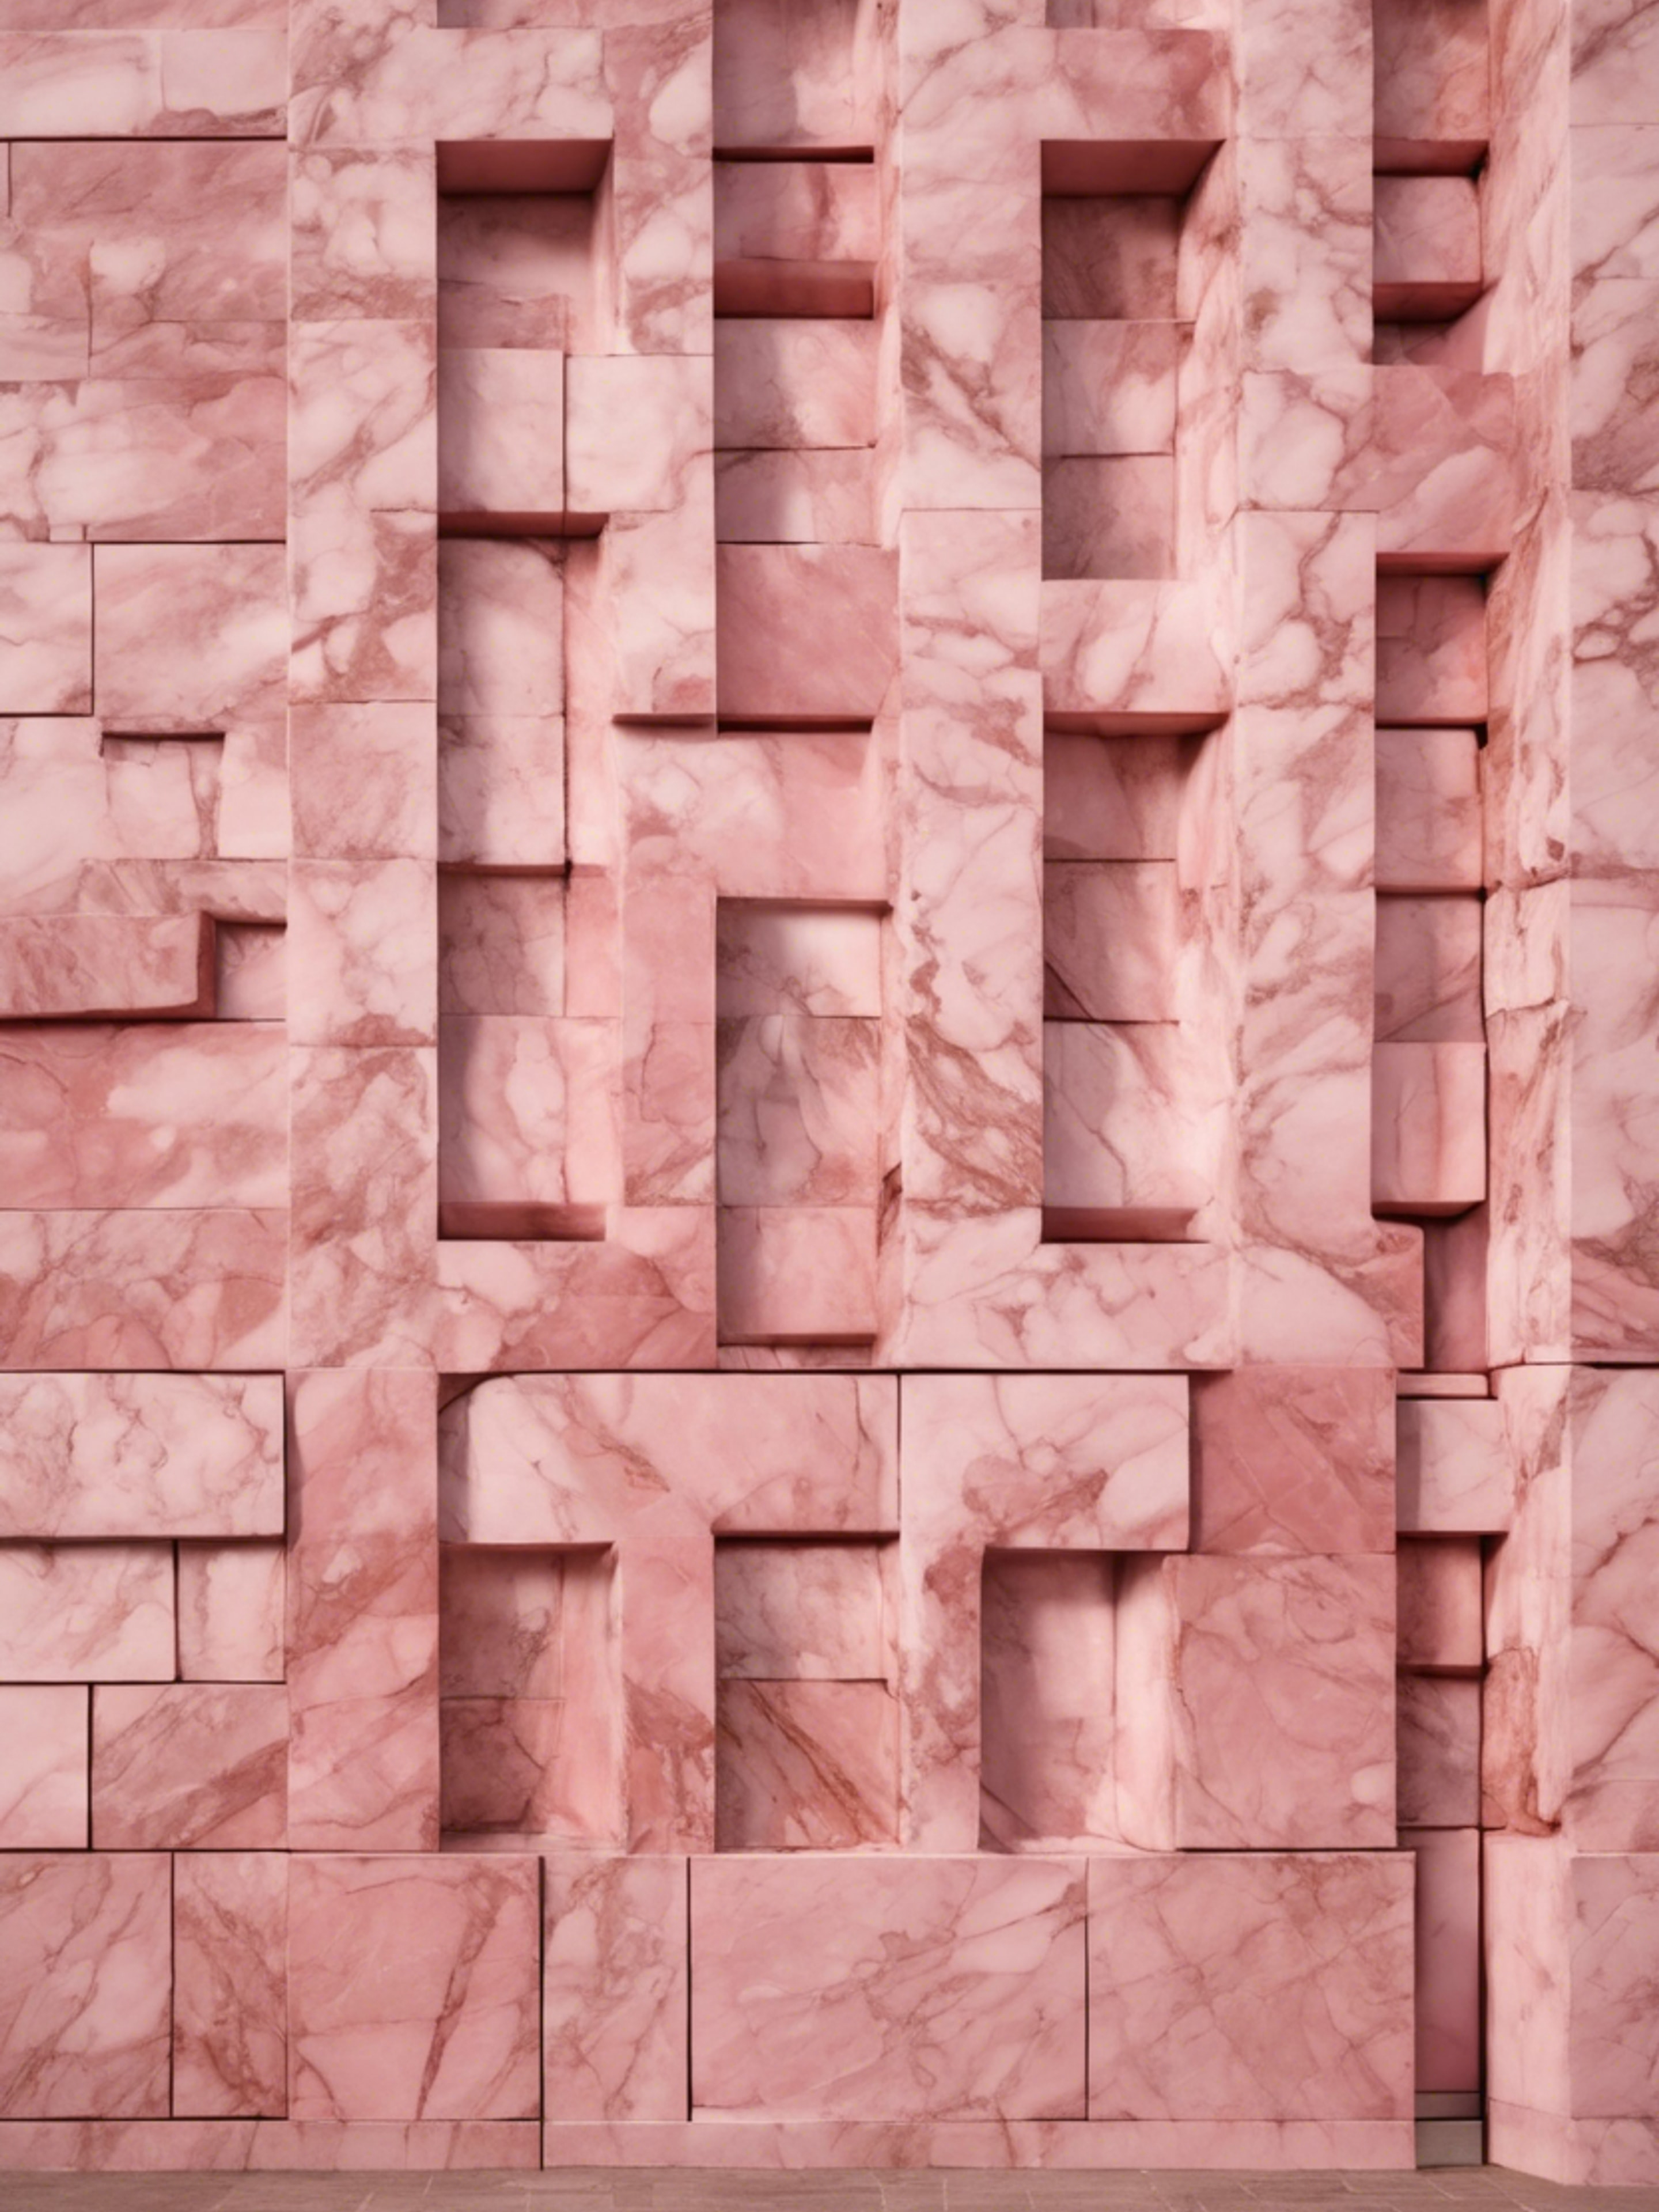 An outdoor wall of a building, made of polished pink marble. Tapeta[24255f95efd34f59a019]